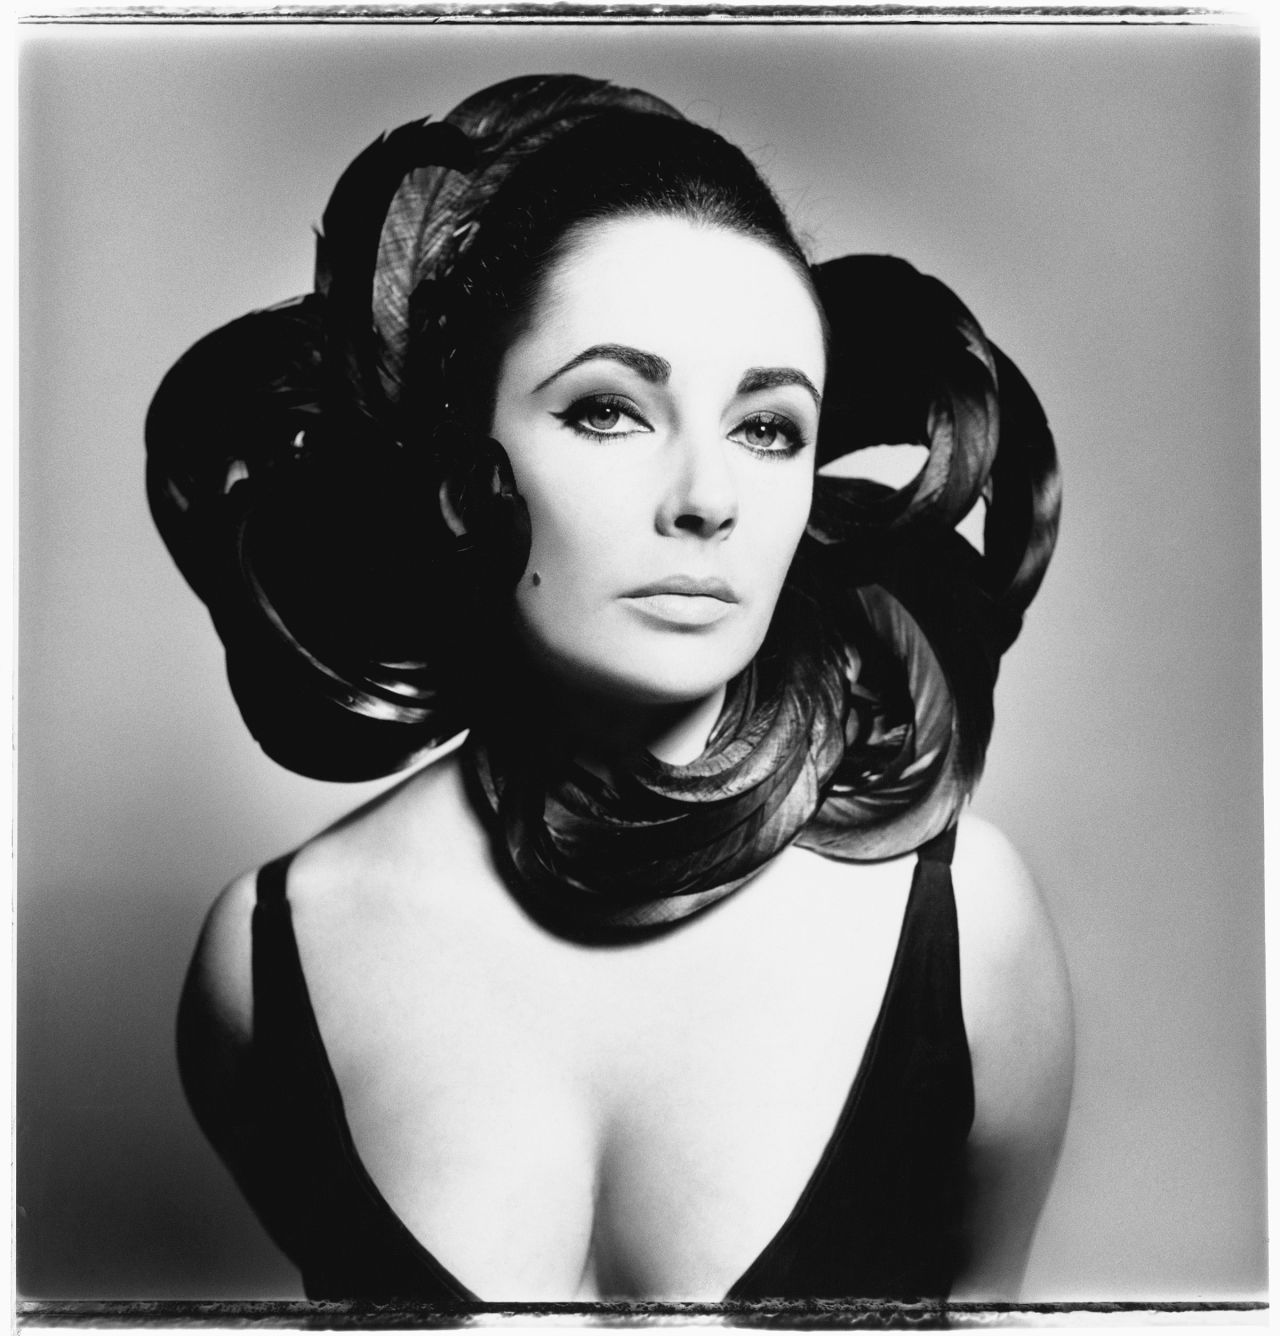 "I've always been taken by Richard Avedon's portrait of Elizabeth Taylor because it epitomizes her timeless beauty," said Kim Kardashian of this 1964 photograph of the Hollywood star. "In this image, he proves why she was such an icon of her era yet, at the same time, completely transcended it."